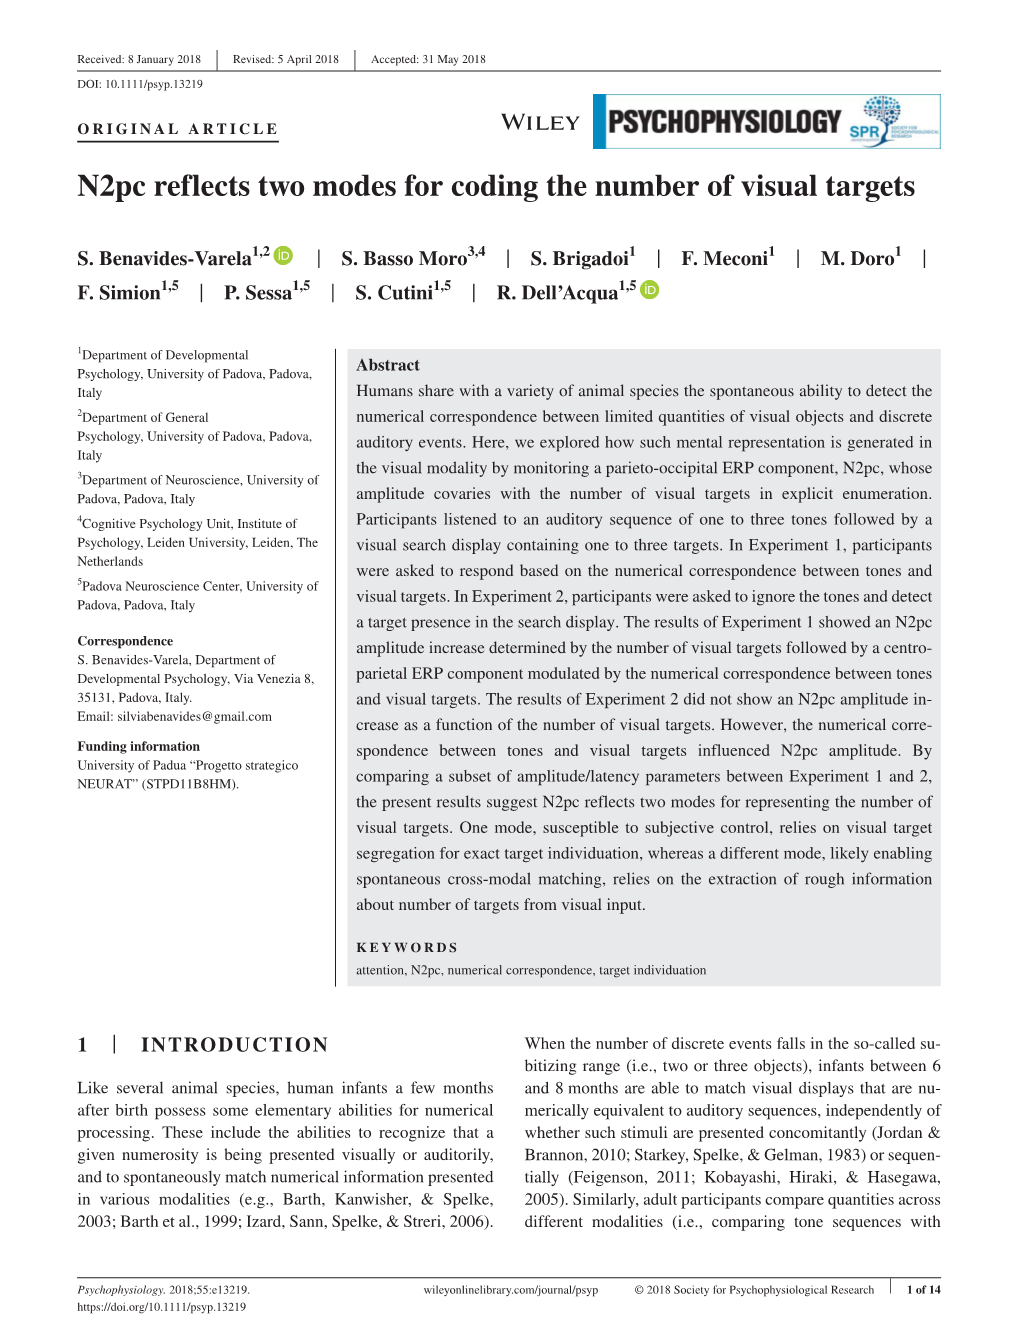 N2pc Reflects Two Modes for Coding the Number of Visual Targets